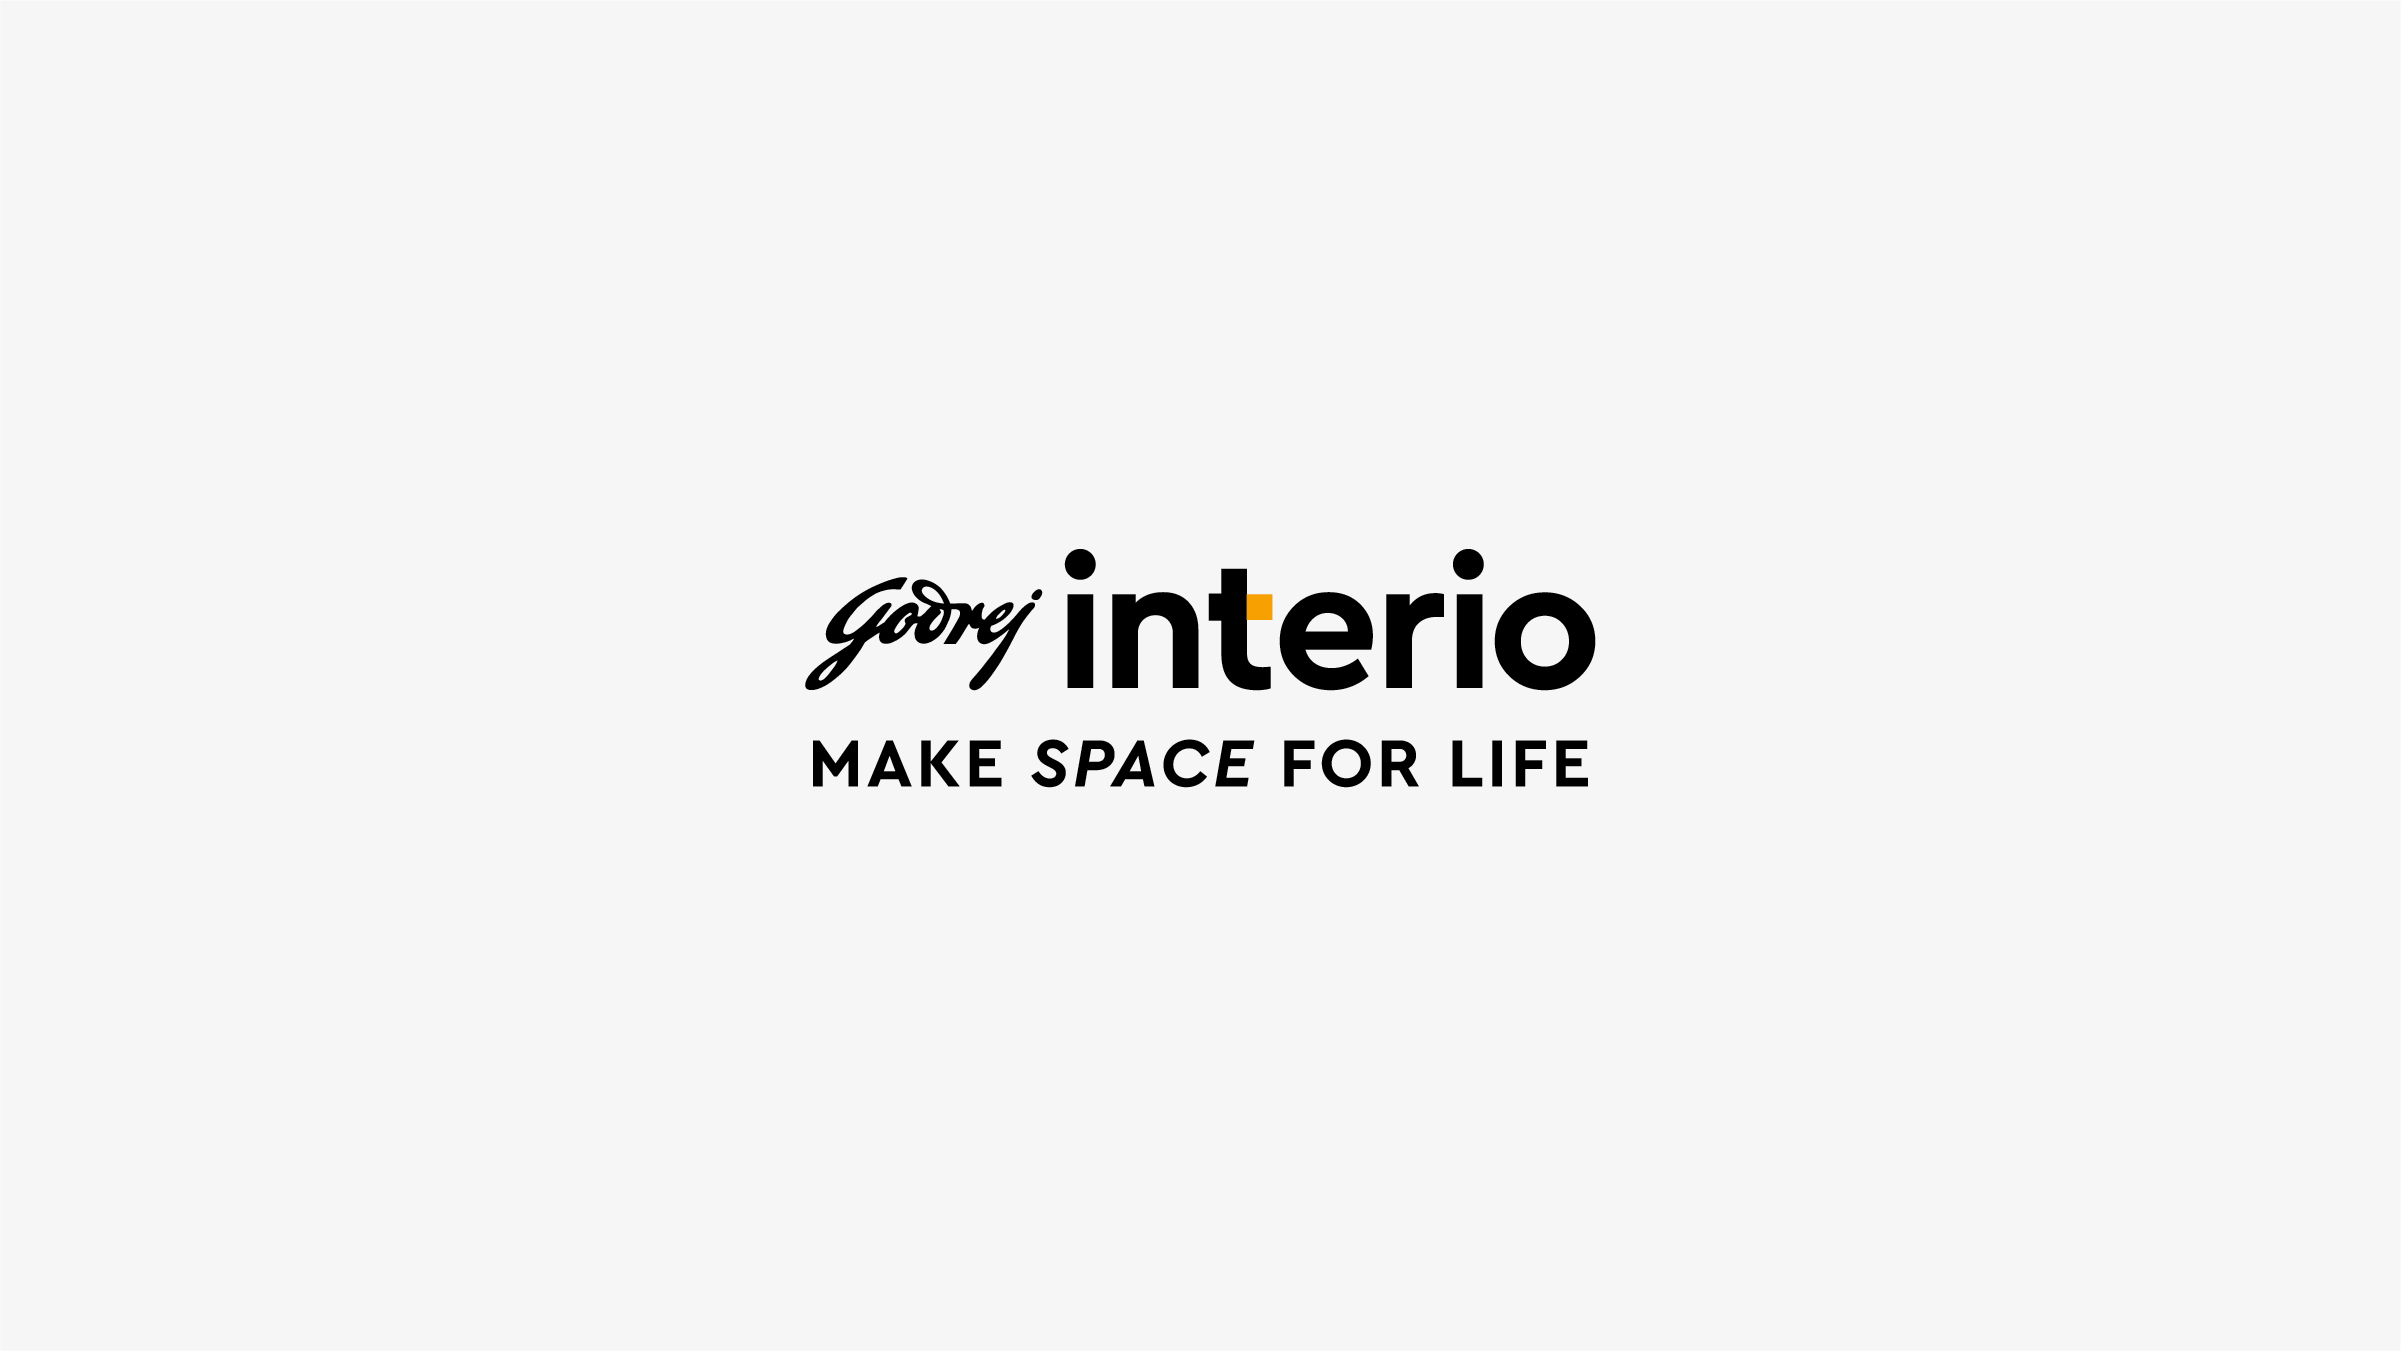 Godrej Interio strengthens it’s infra business; aims to clock INR 300 crore revenue in FY23 decoding=